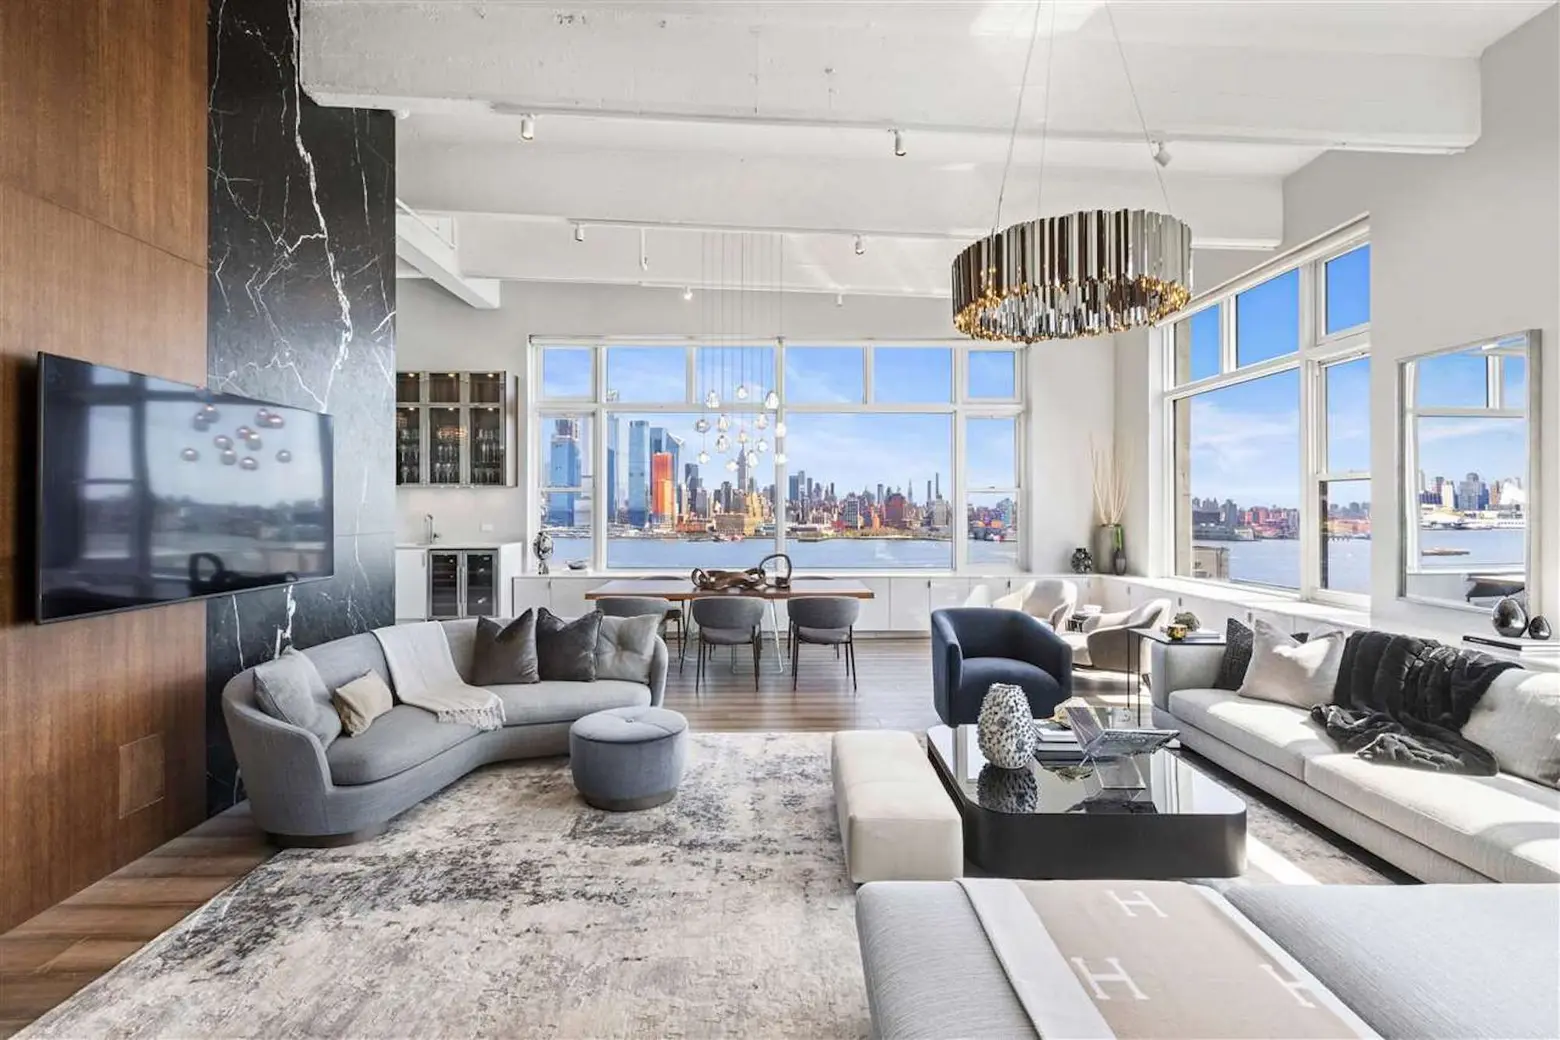 $4.2M penthouse condo sets sale record in Hoboken